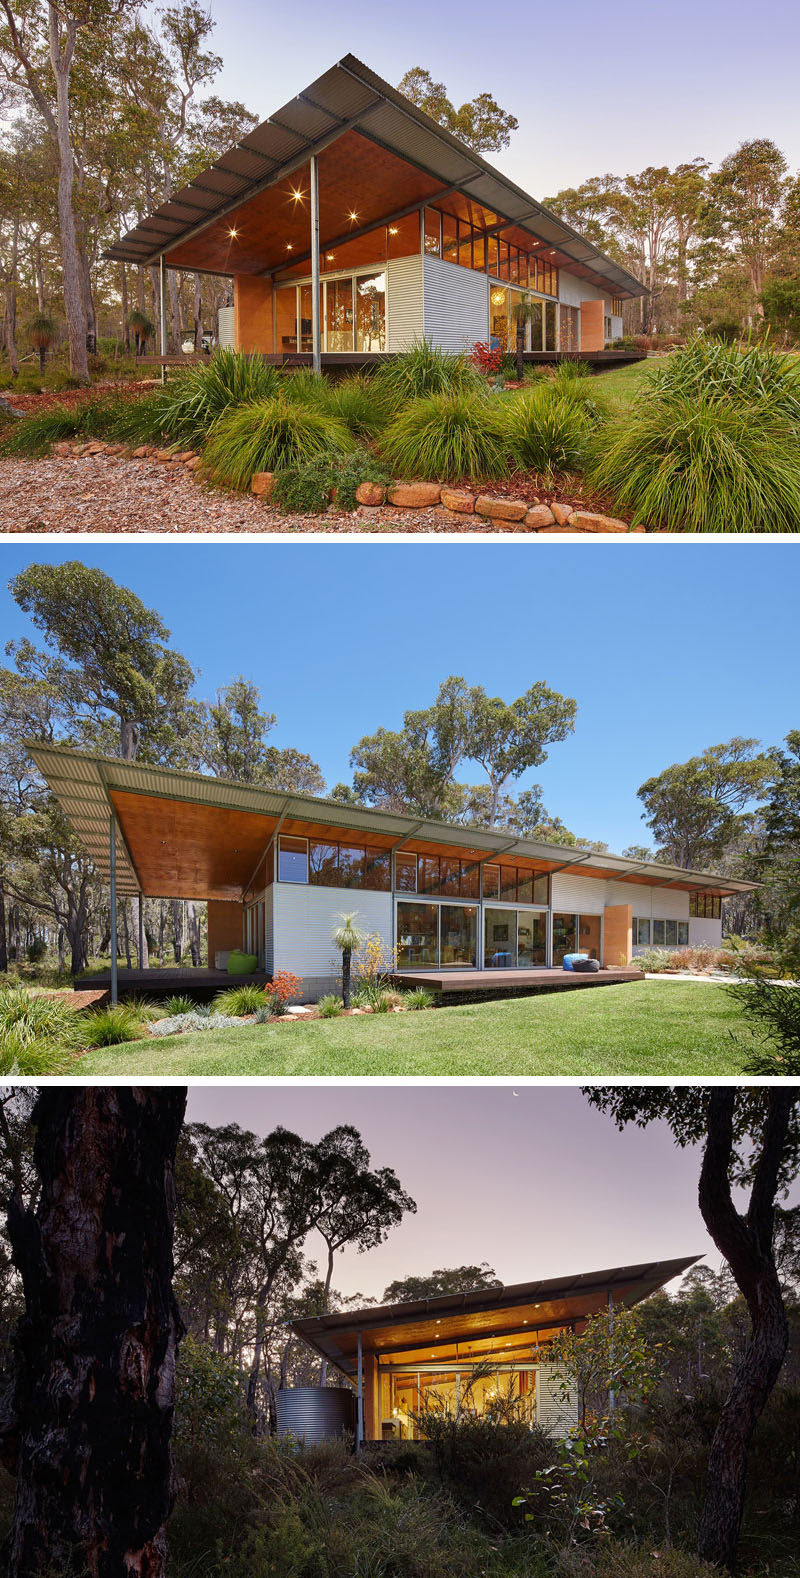 16 Examples Of Modern Houses With A Sloped Roof | This sloped roof on this modern house helps collect rain water and shields the interior of the home from the harsh Australian heat.